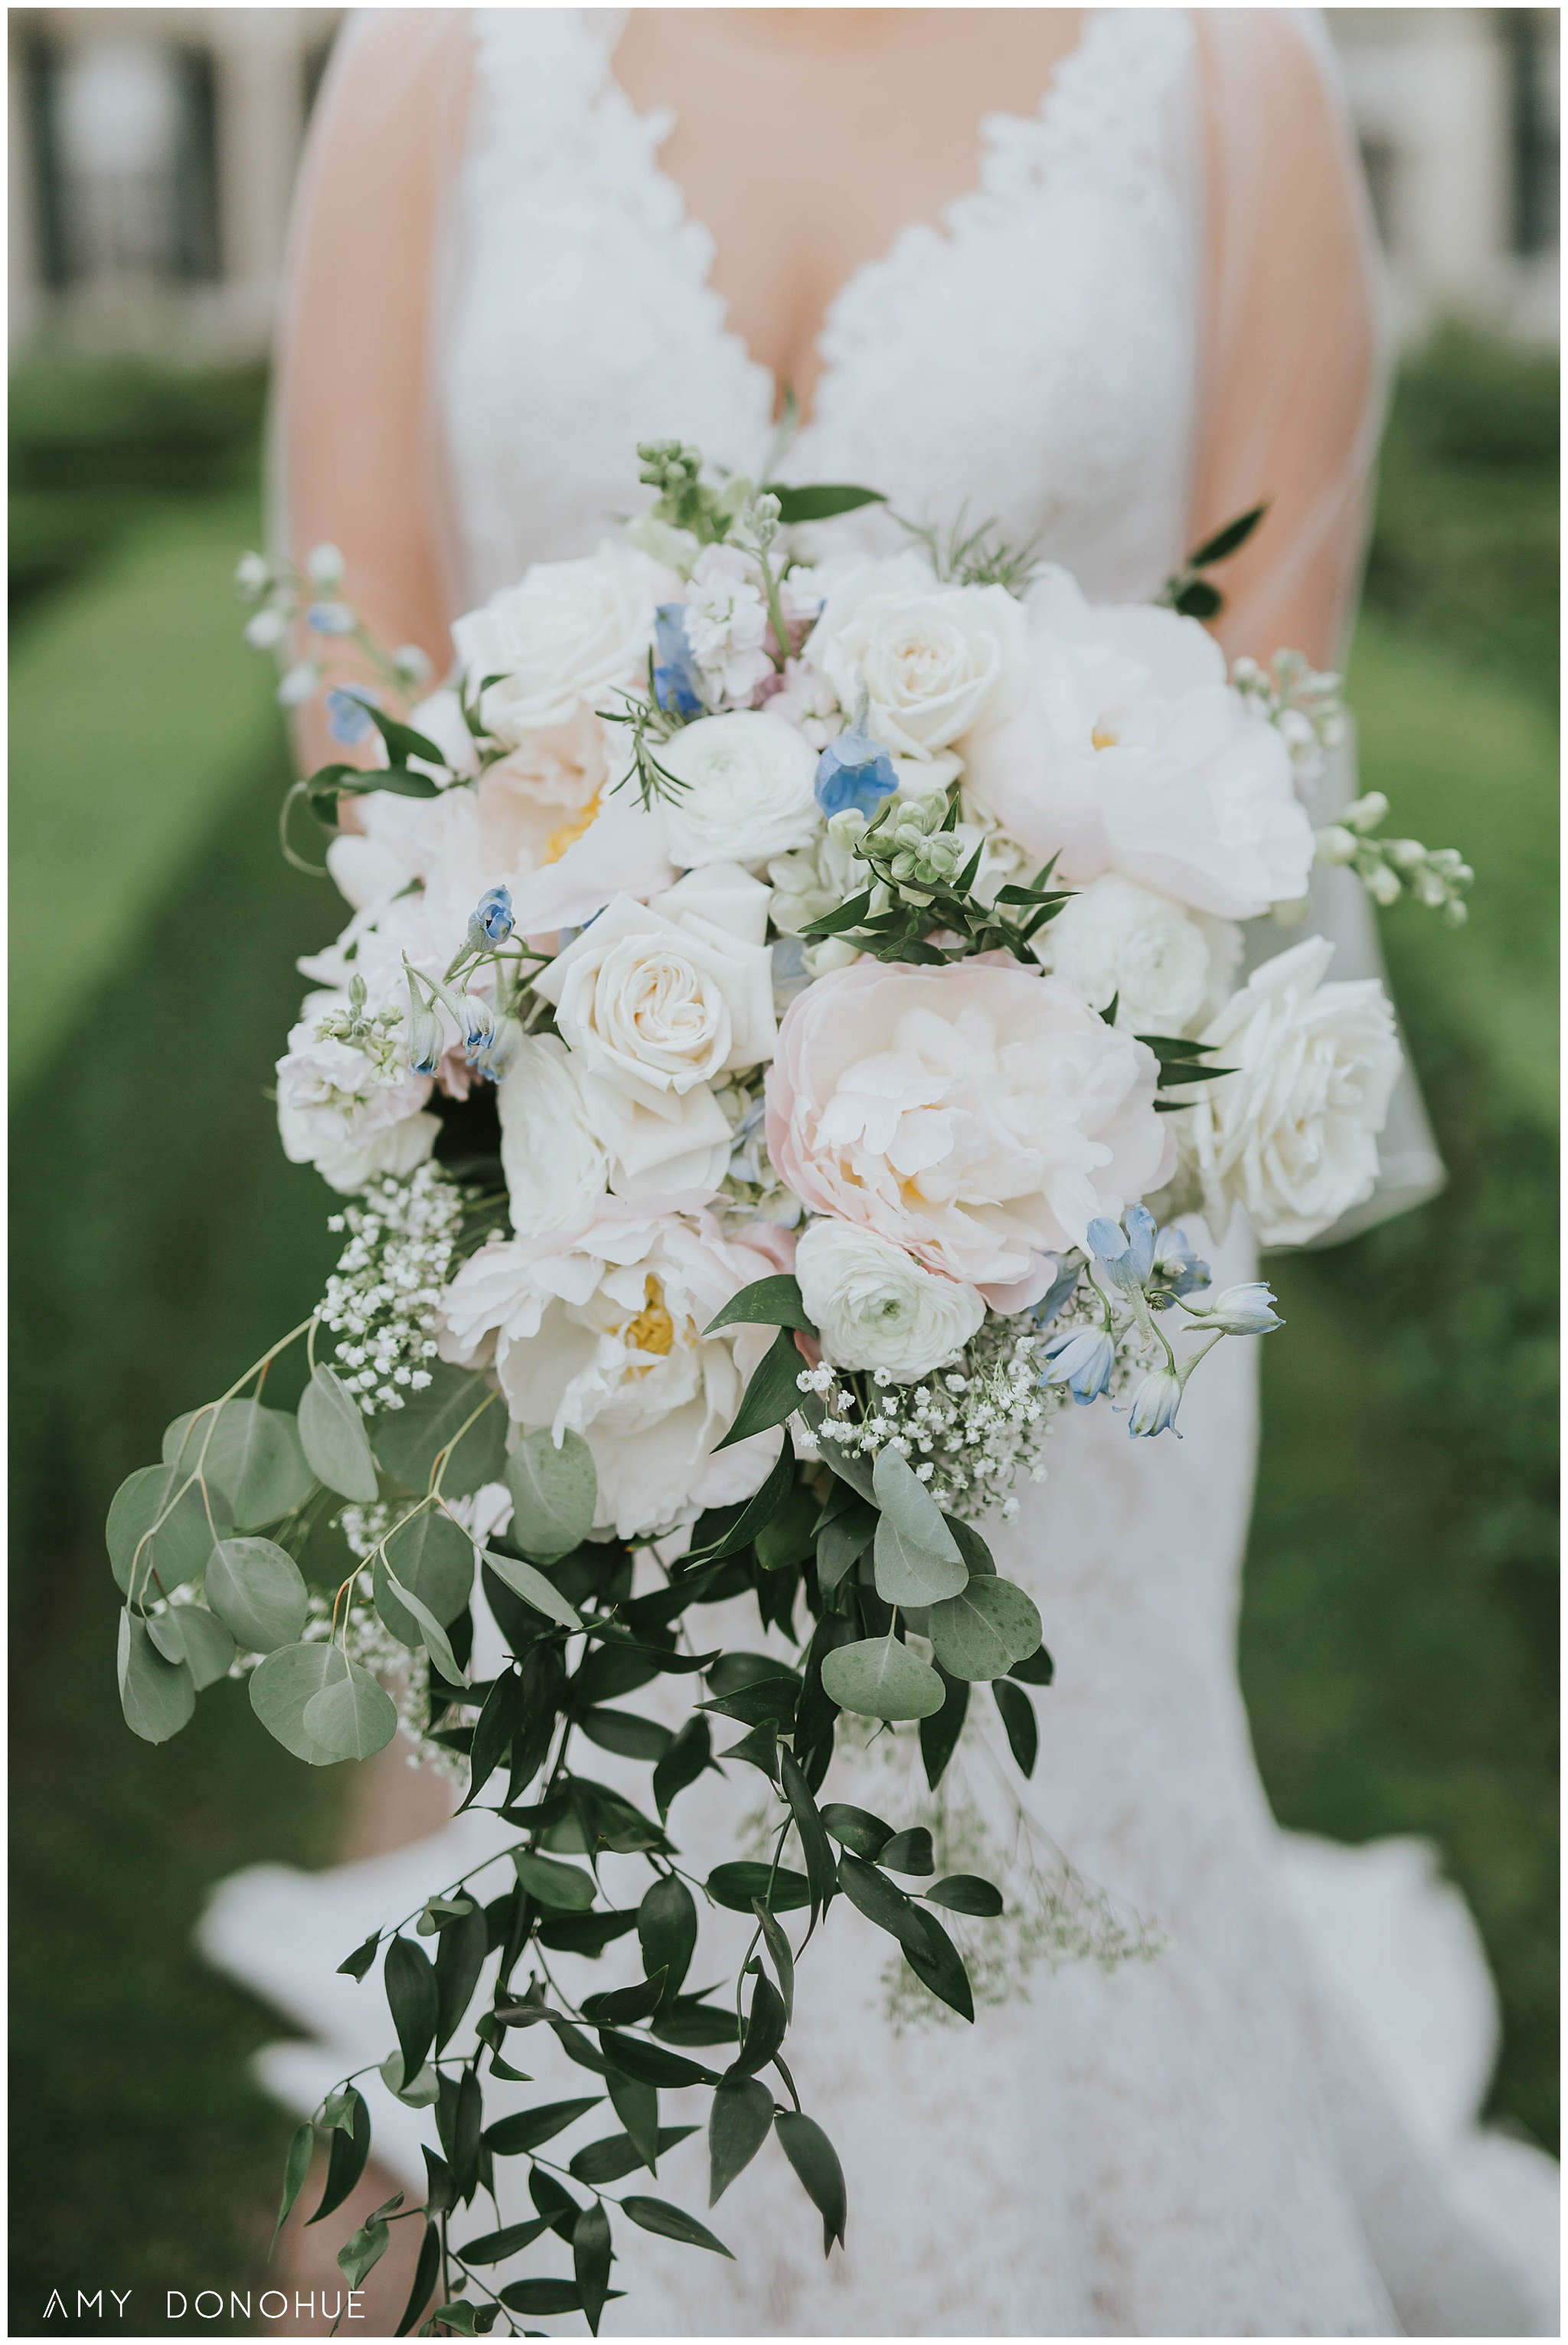 Bridal bouquet made by Lily of the Valley Florist in Manchester, Vermont for a wedding at The Hildene.